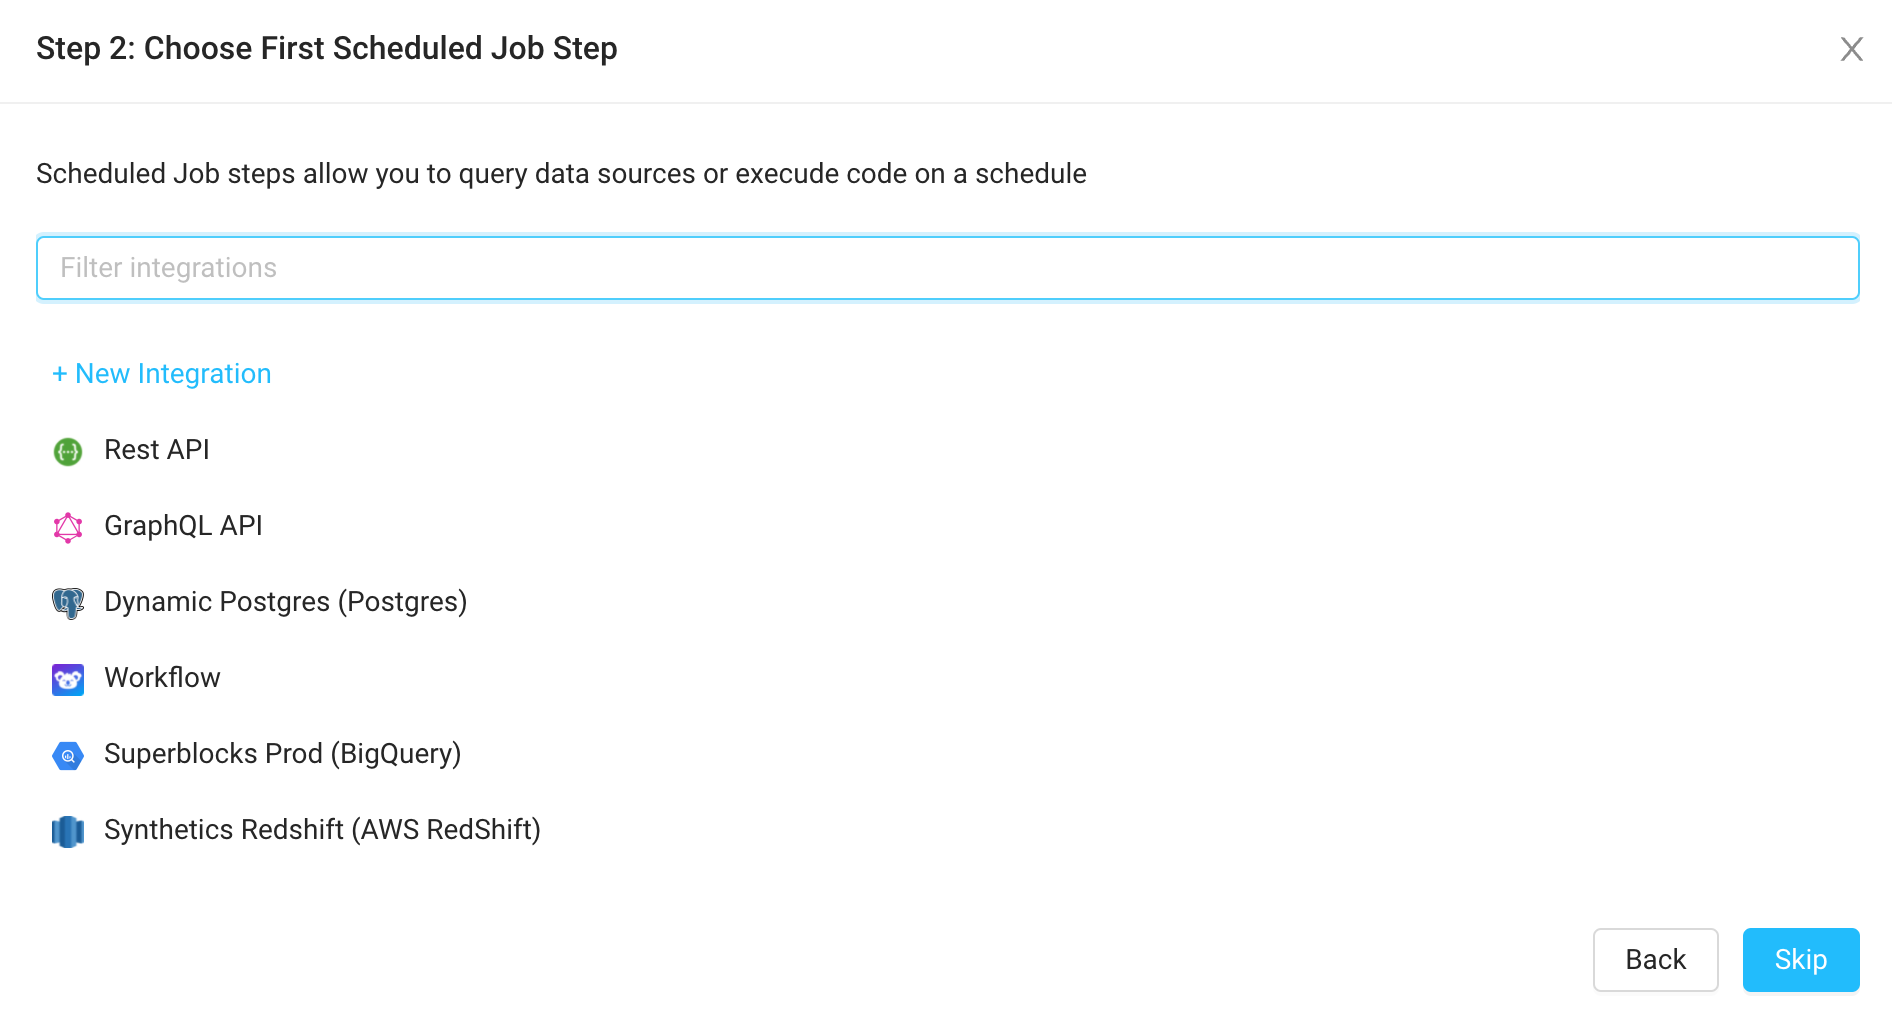 Scheduled job steps allow you to query data sources or execute code on a schedule